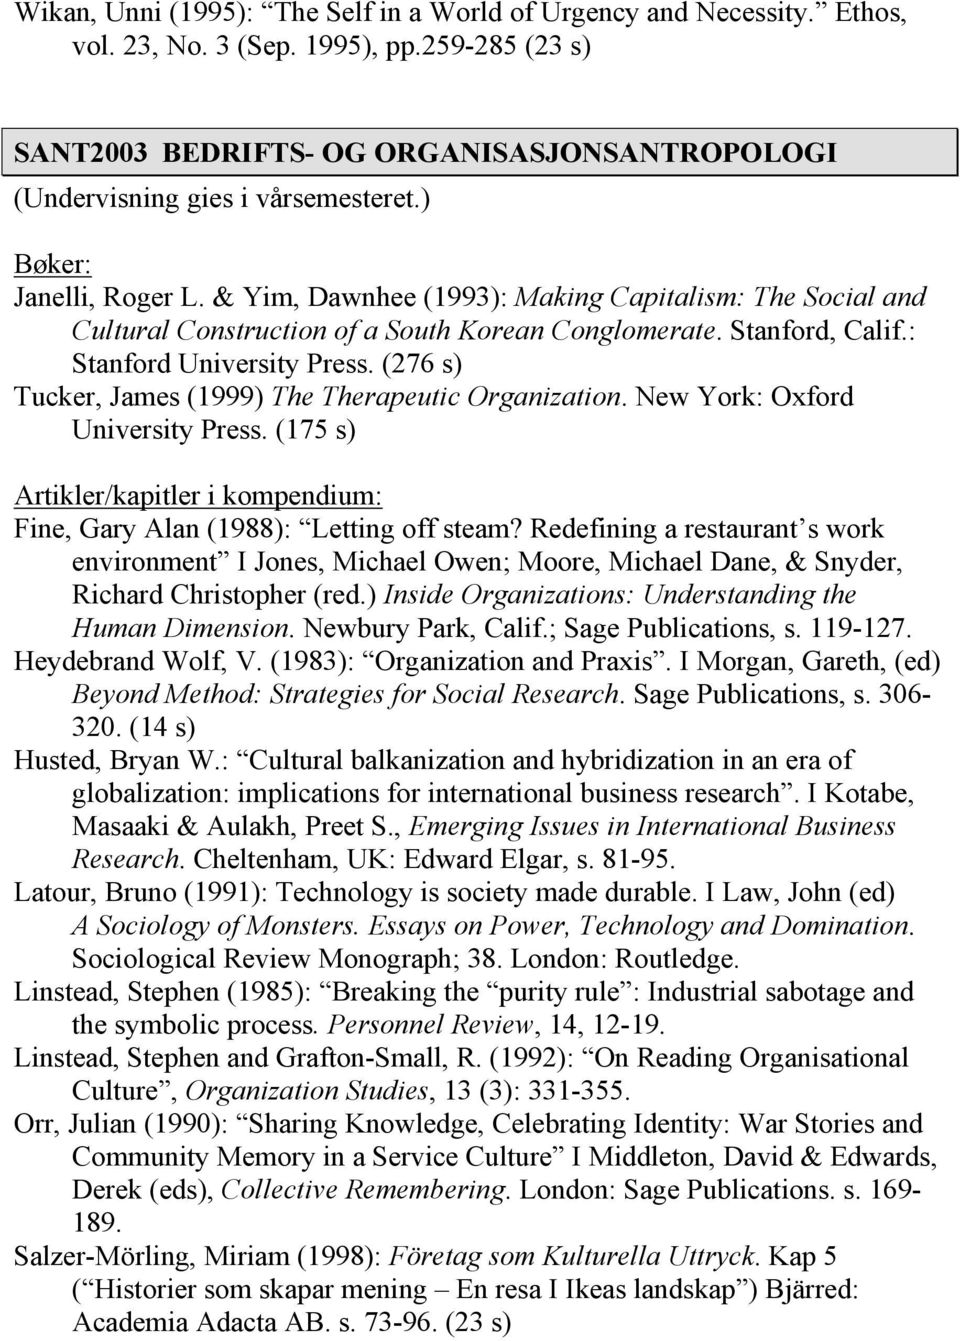 & Yim, Dawnhee (1993): Making Capitalism: The Social and Cultural Construction of a South Korean Conglomerate. Stanford, Calif.: Stanford University Press.